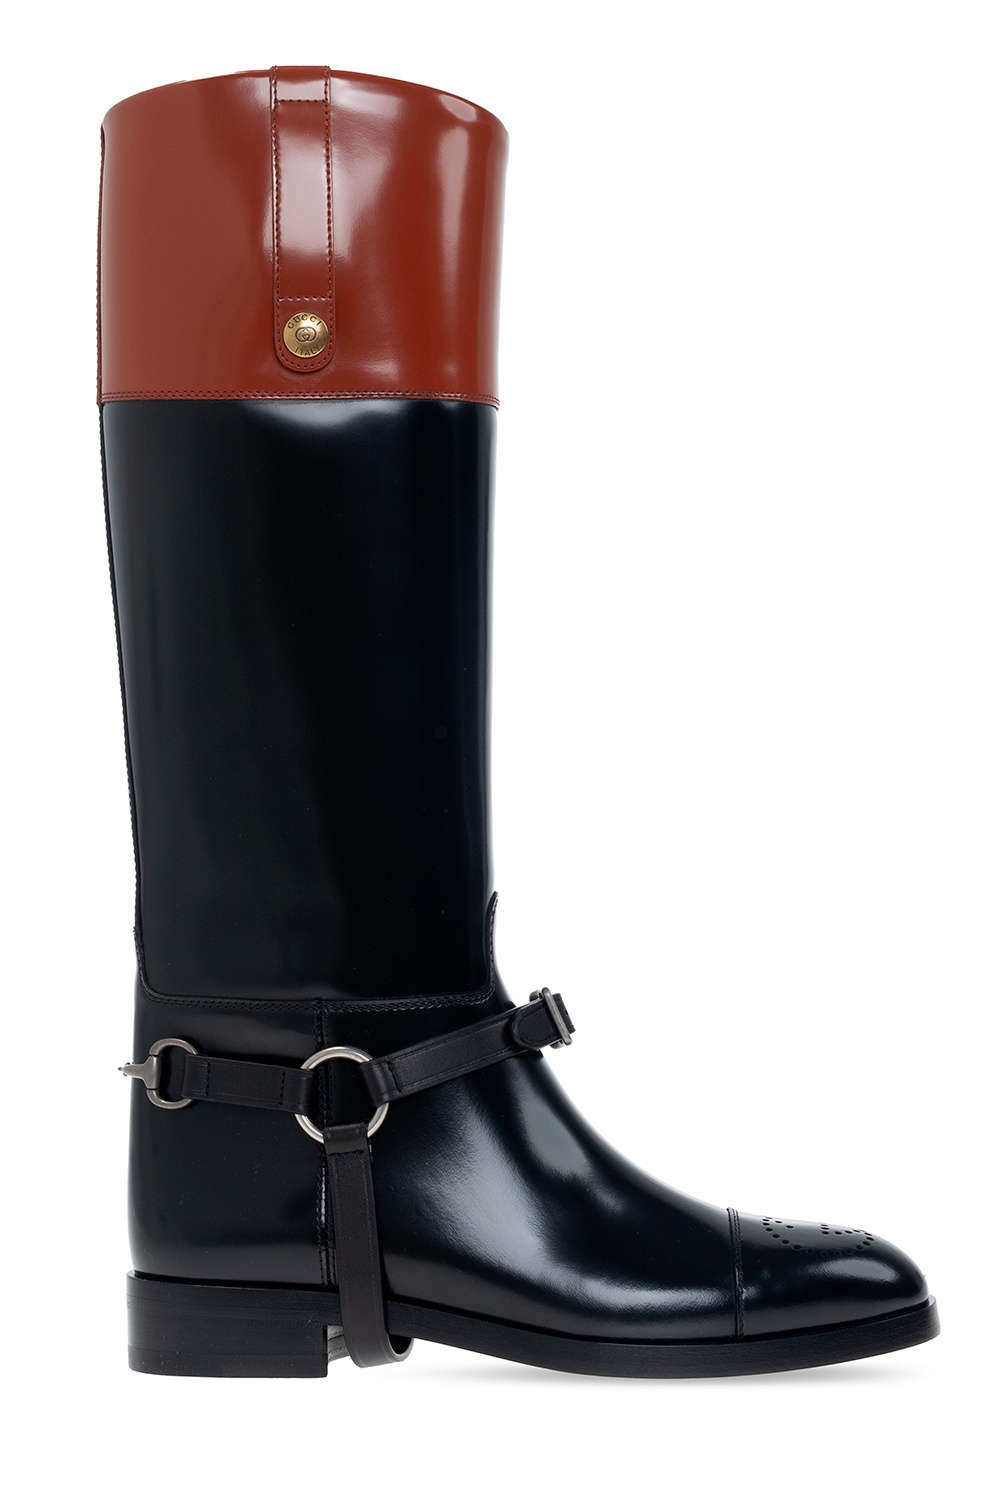 high boots Gucci - IetpShops Egypt - gucci black trinket tray - Leather knee